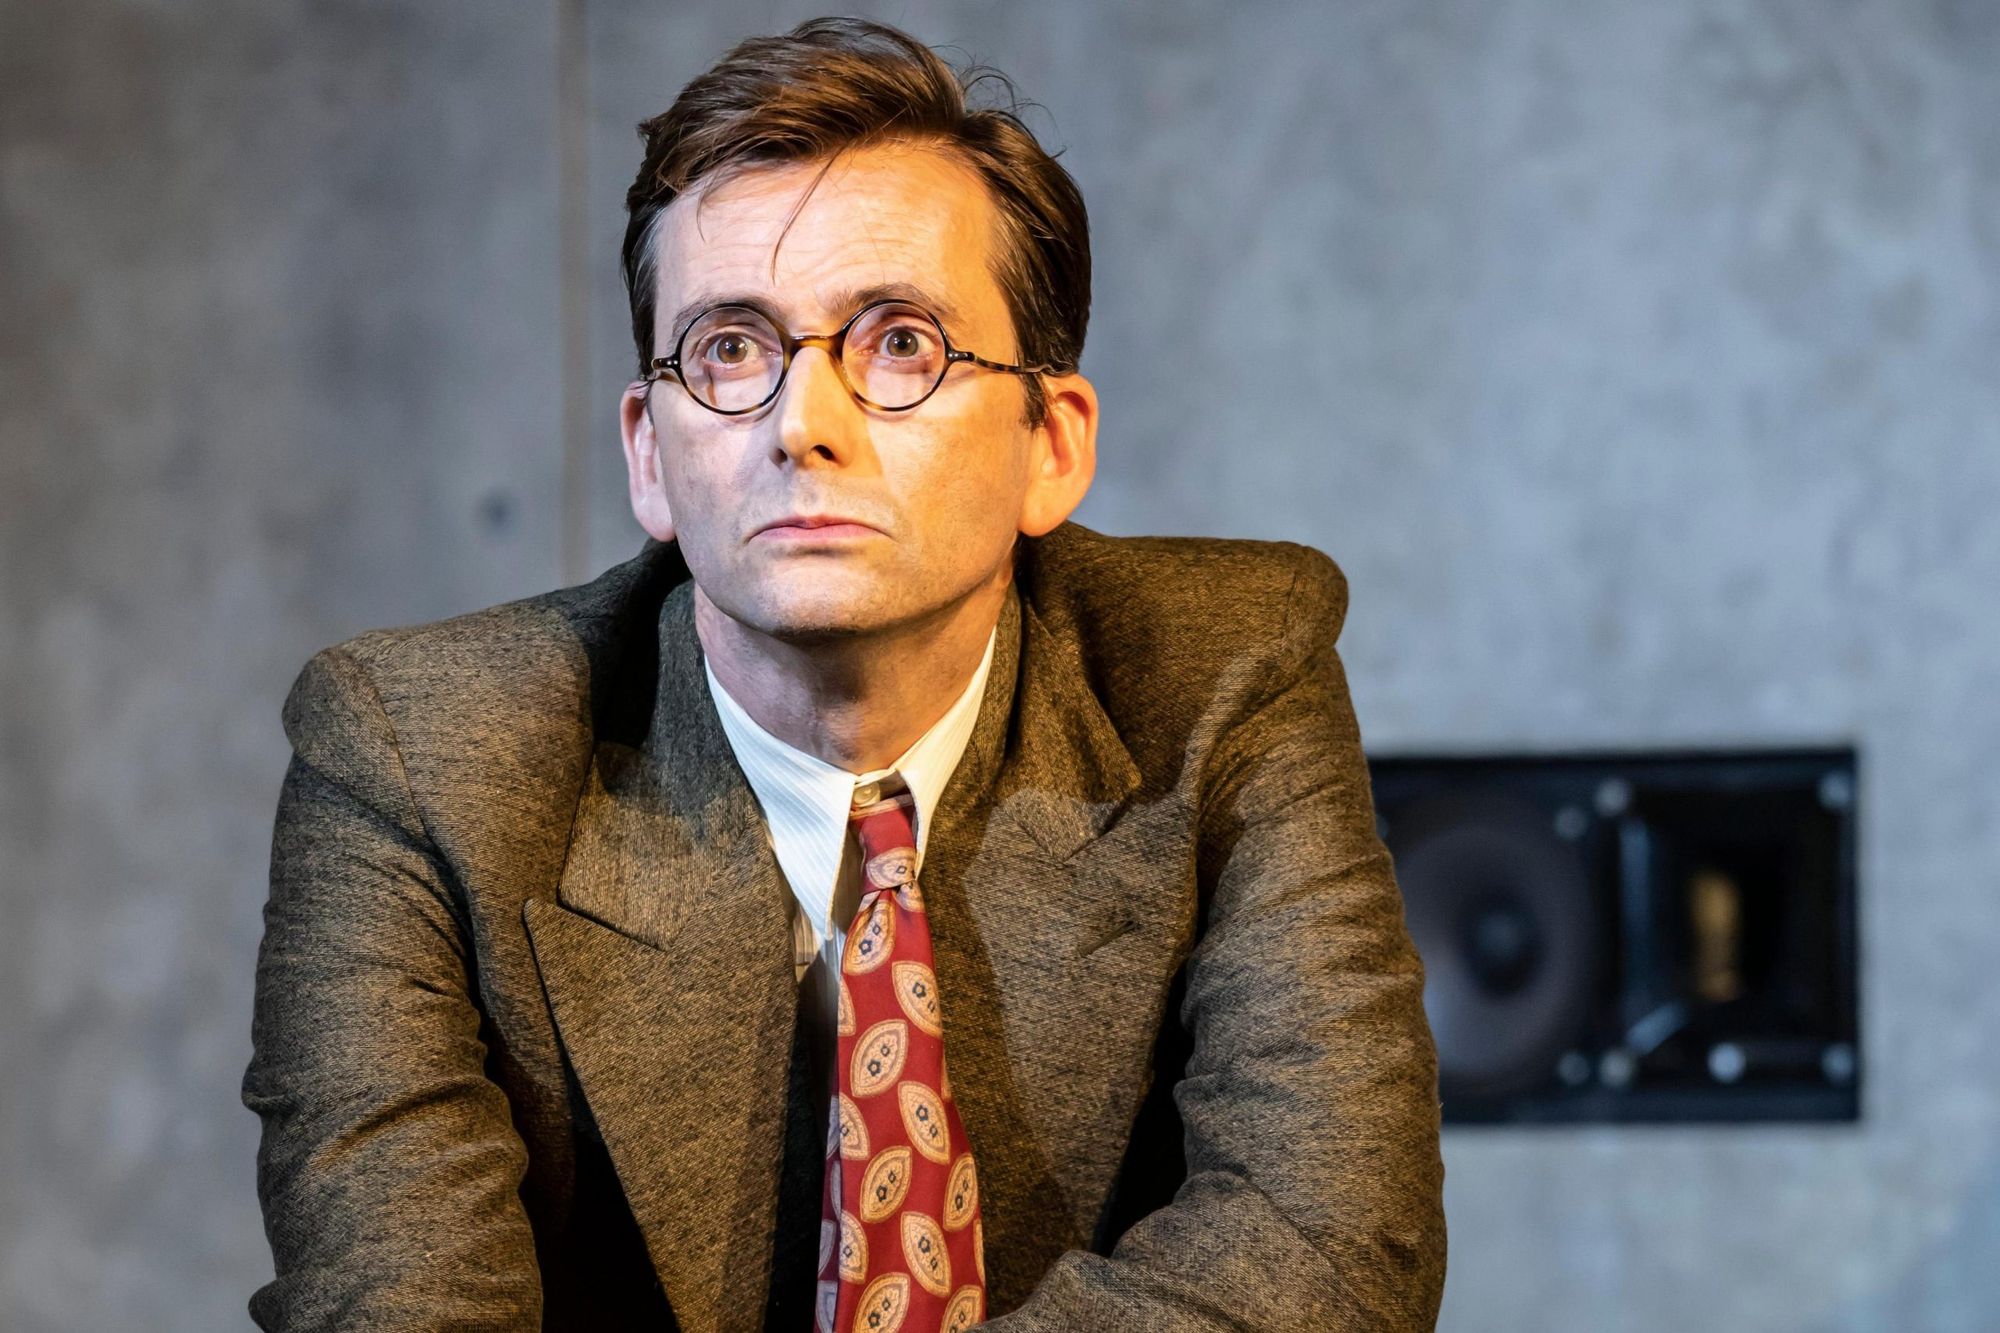 David Tennant as John Halder in a tweed suit and 1930 spectacles, he has a flat expression with a touch of concern